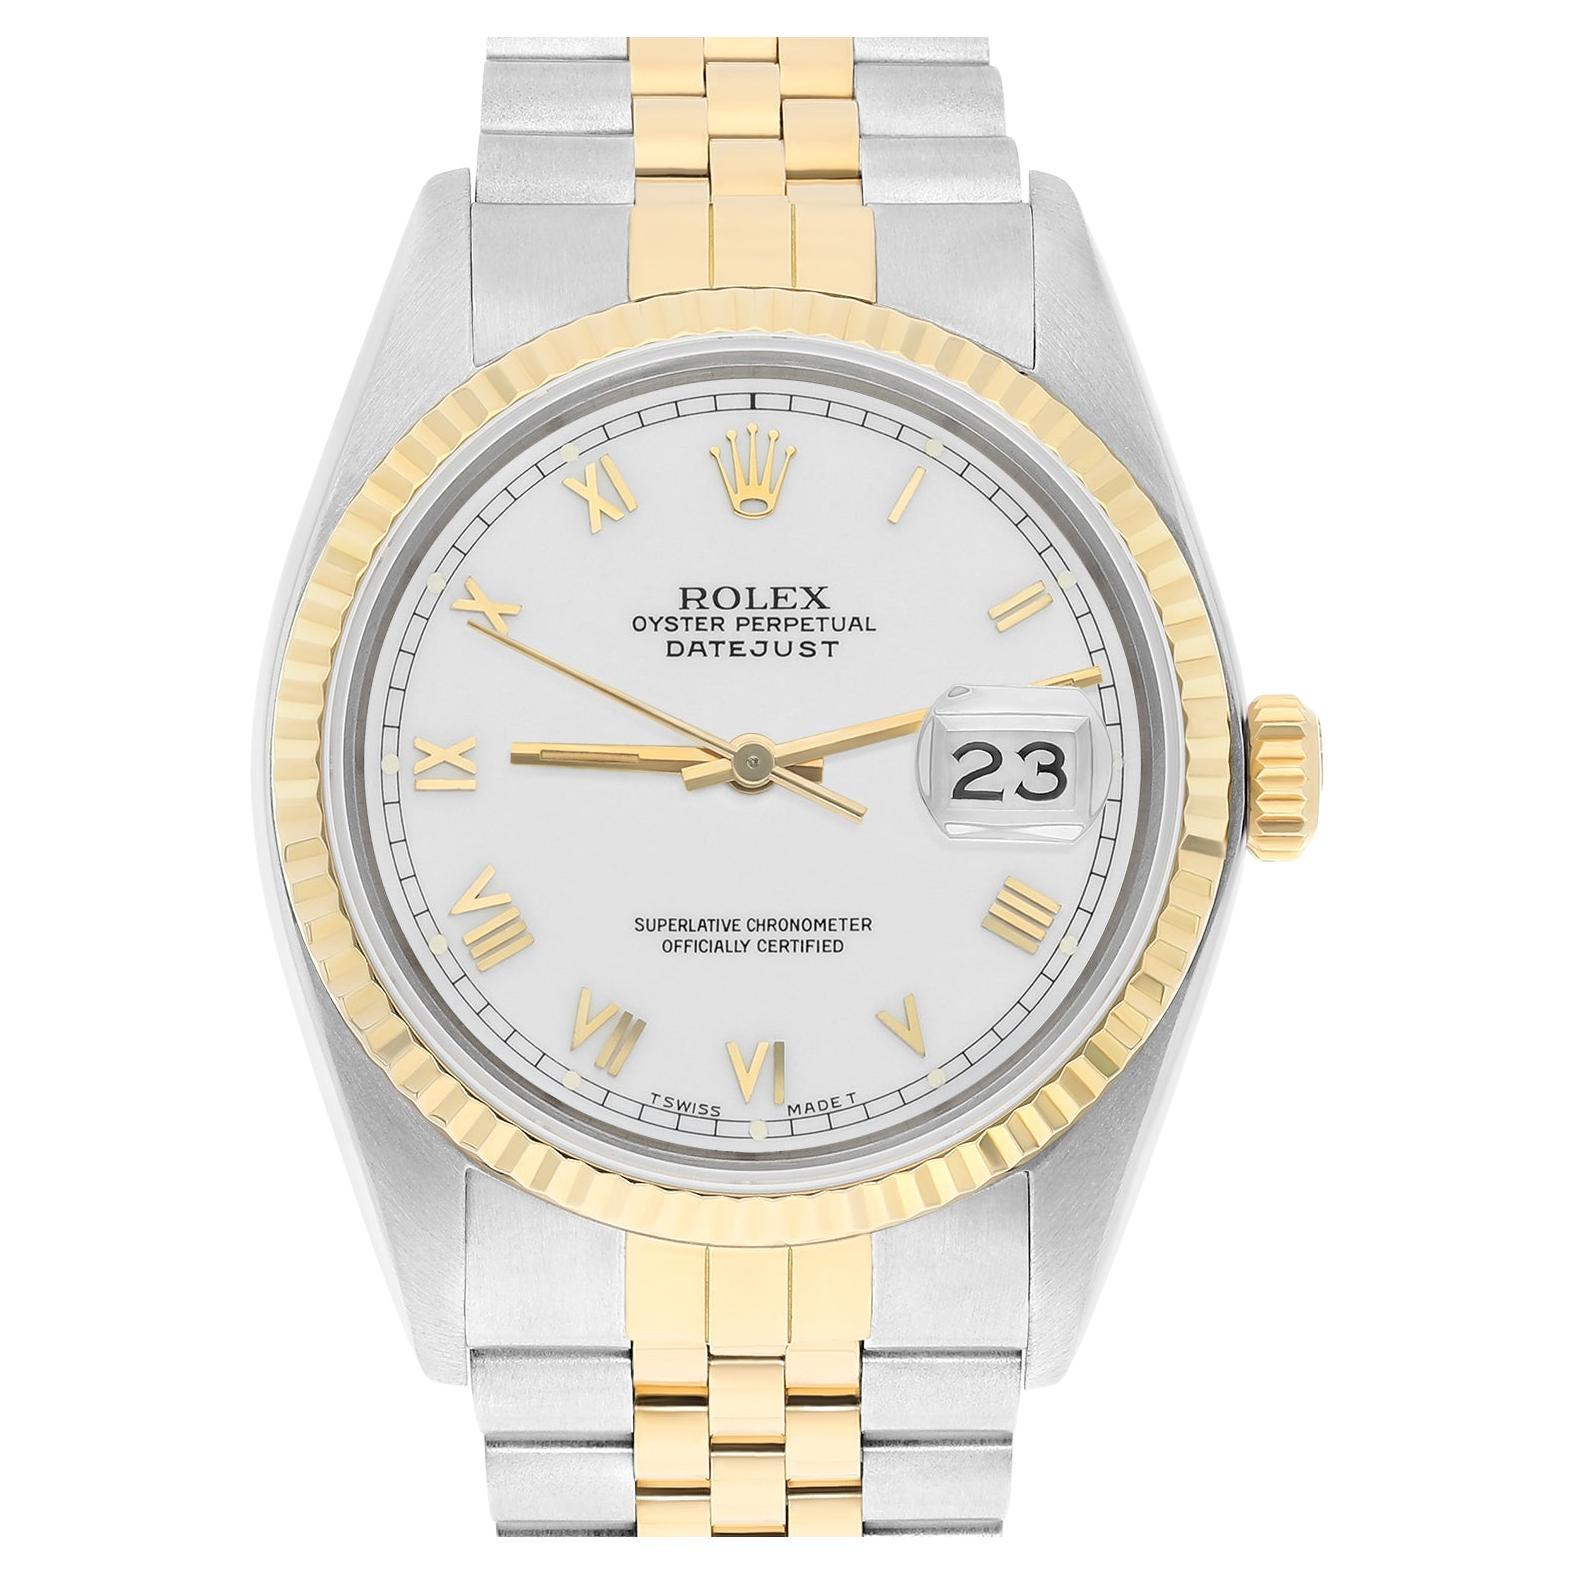 Rolex Datejust 36mm Two Tone White Roman Numeral Dial Jubilee 16013 Circa 1987 For Sale